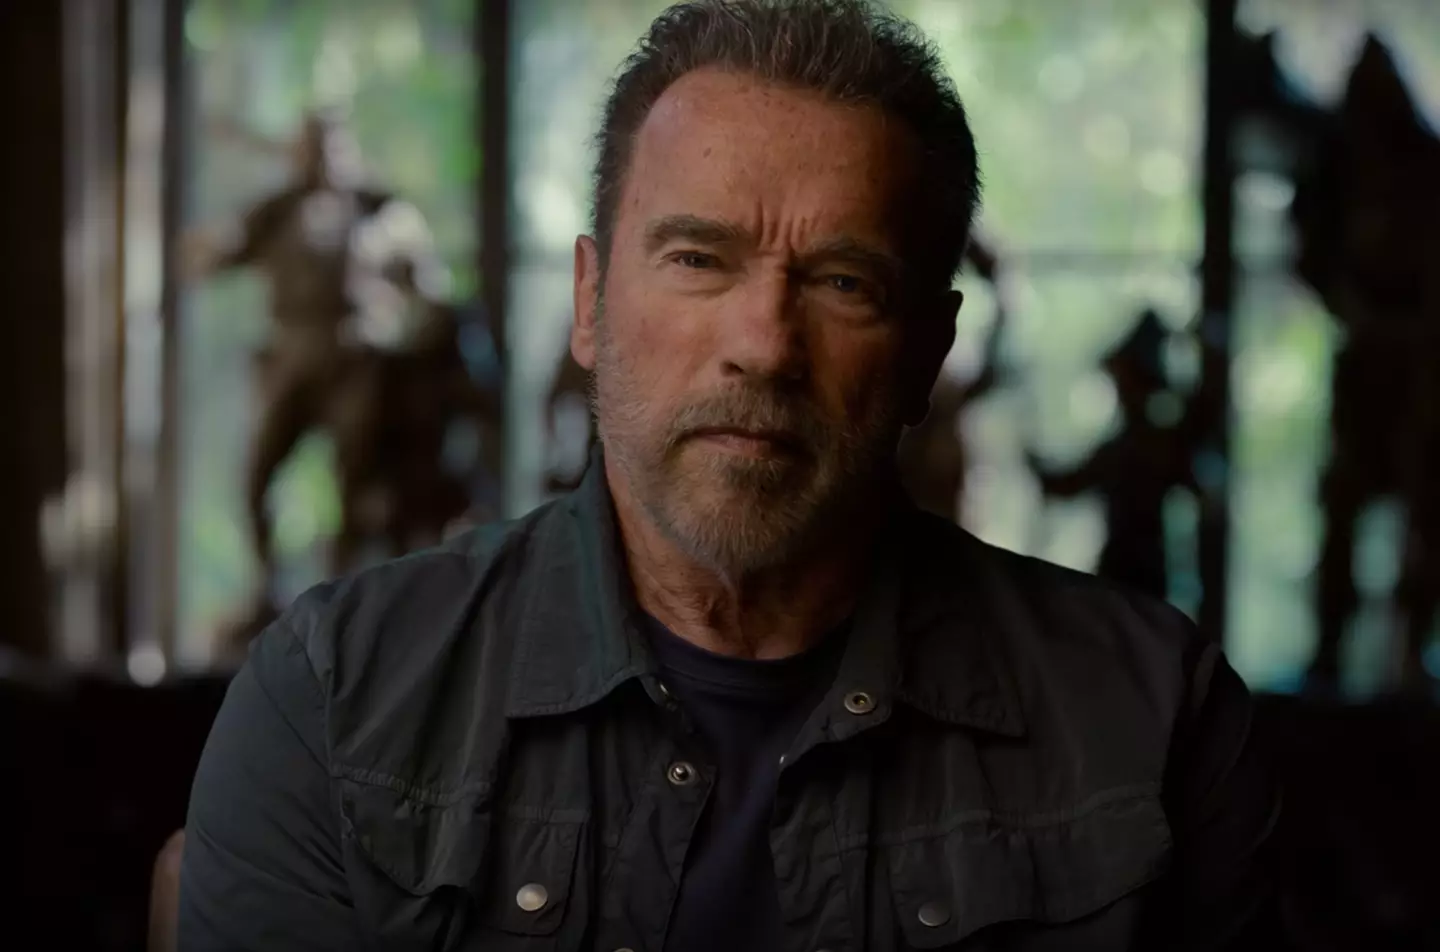 Arnold Schwarzenegger has opened up about the 'violence' of his childhood in the new Netflix docuseries.